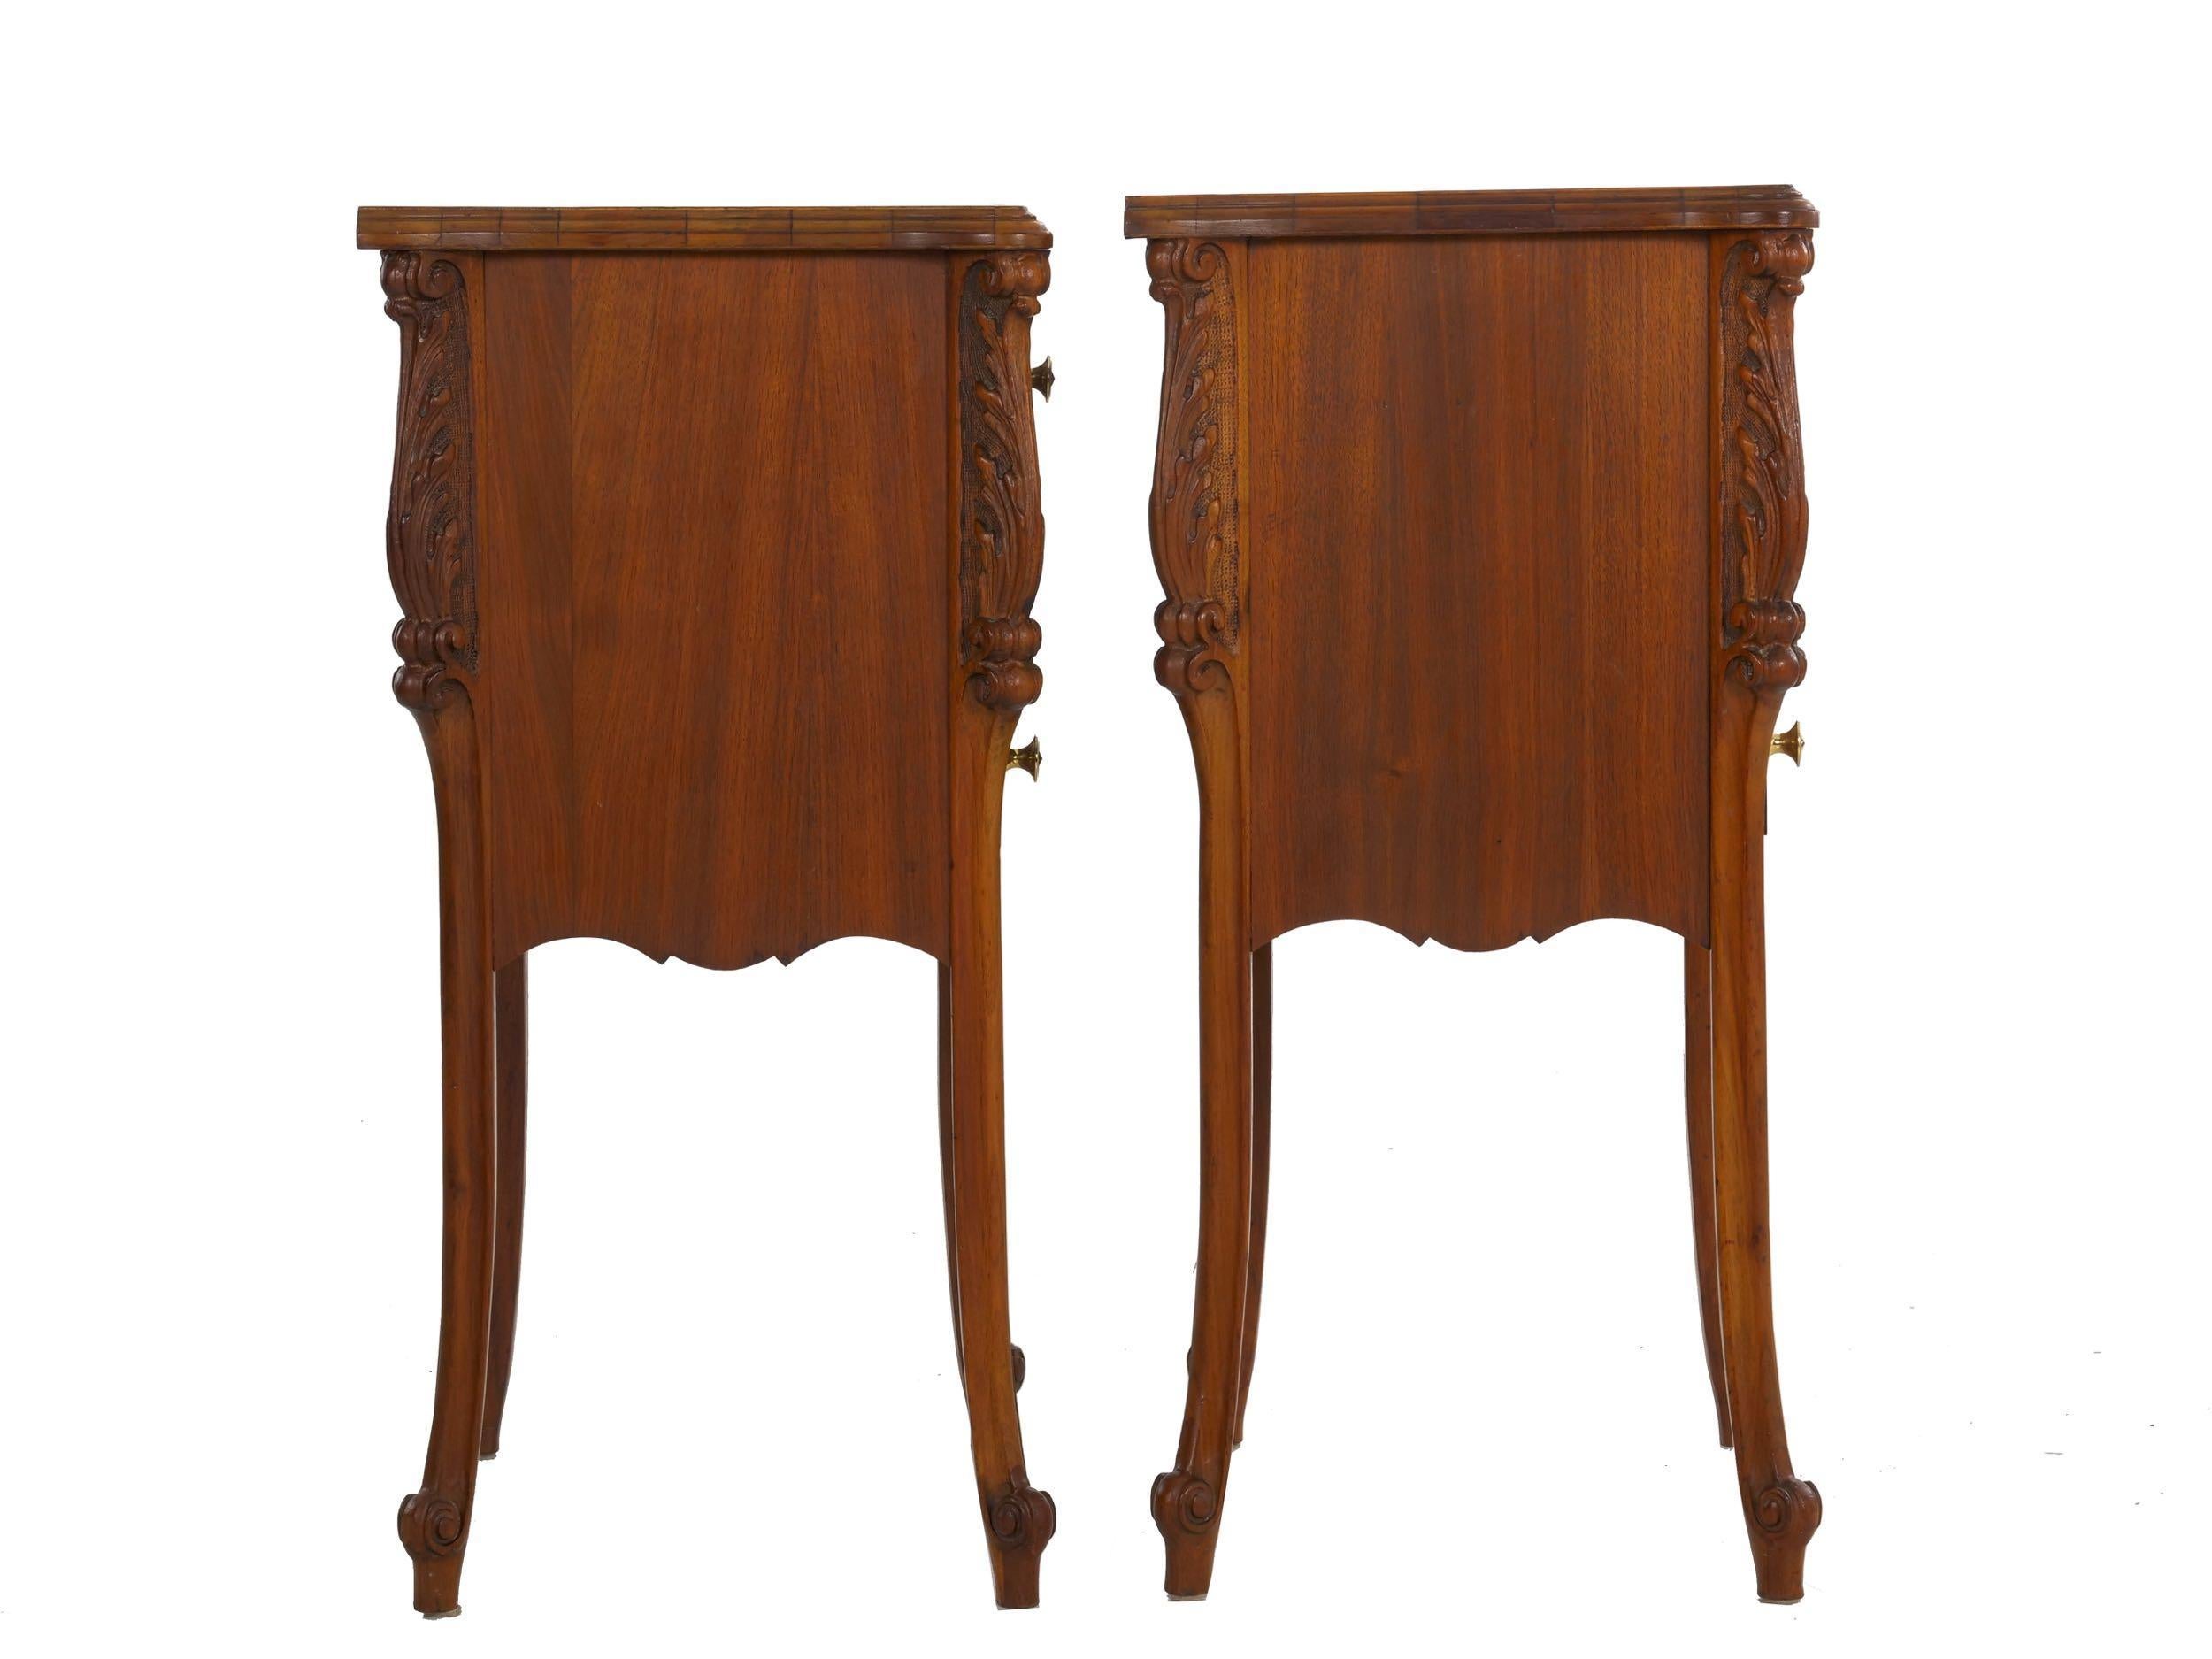 Brass French Art Nouveau Carved Walnut Nightstand Tables, a Pair